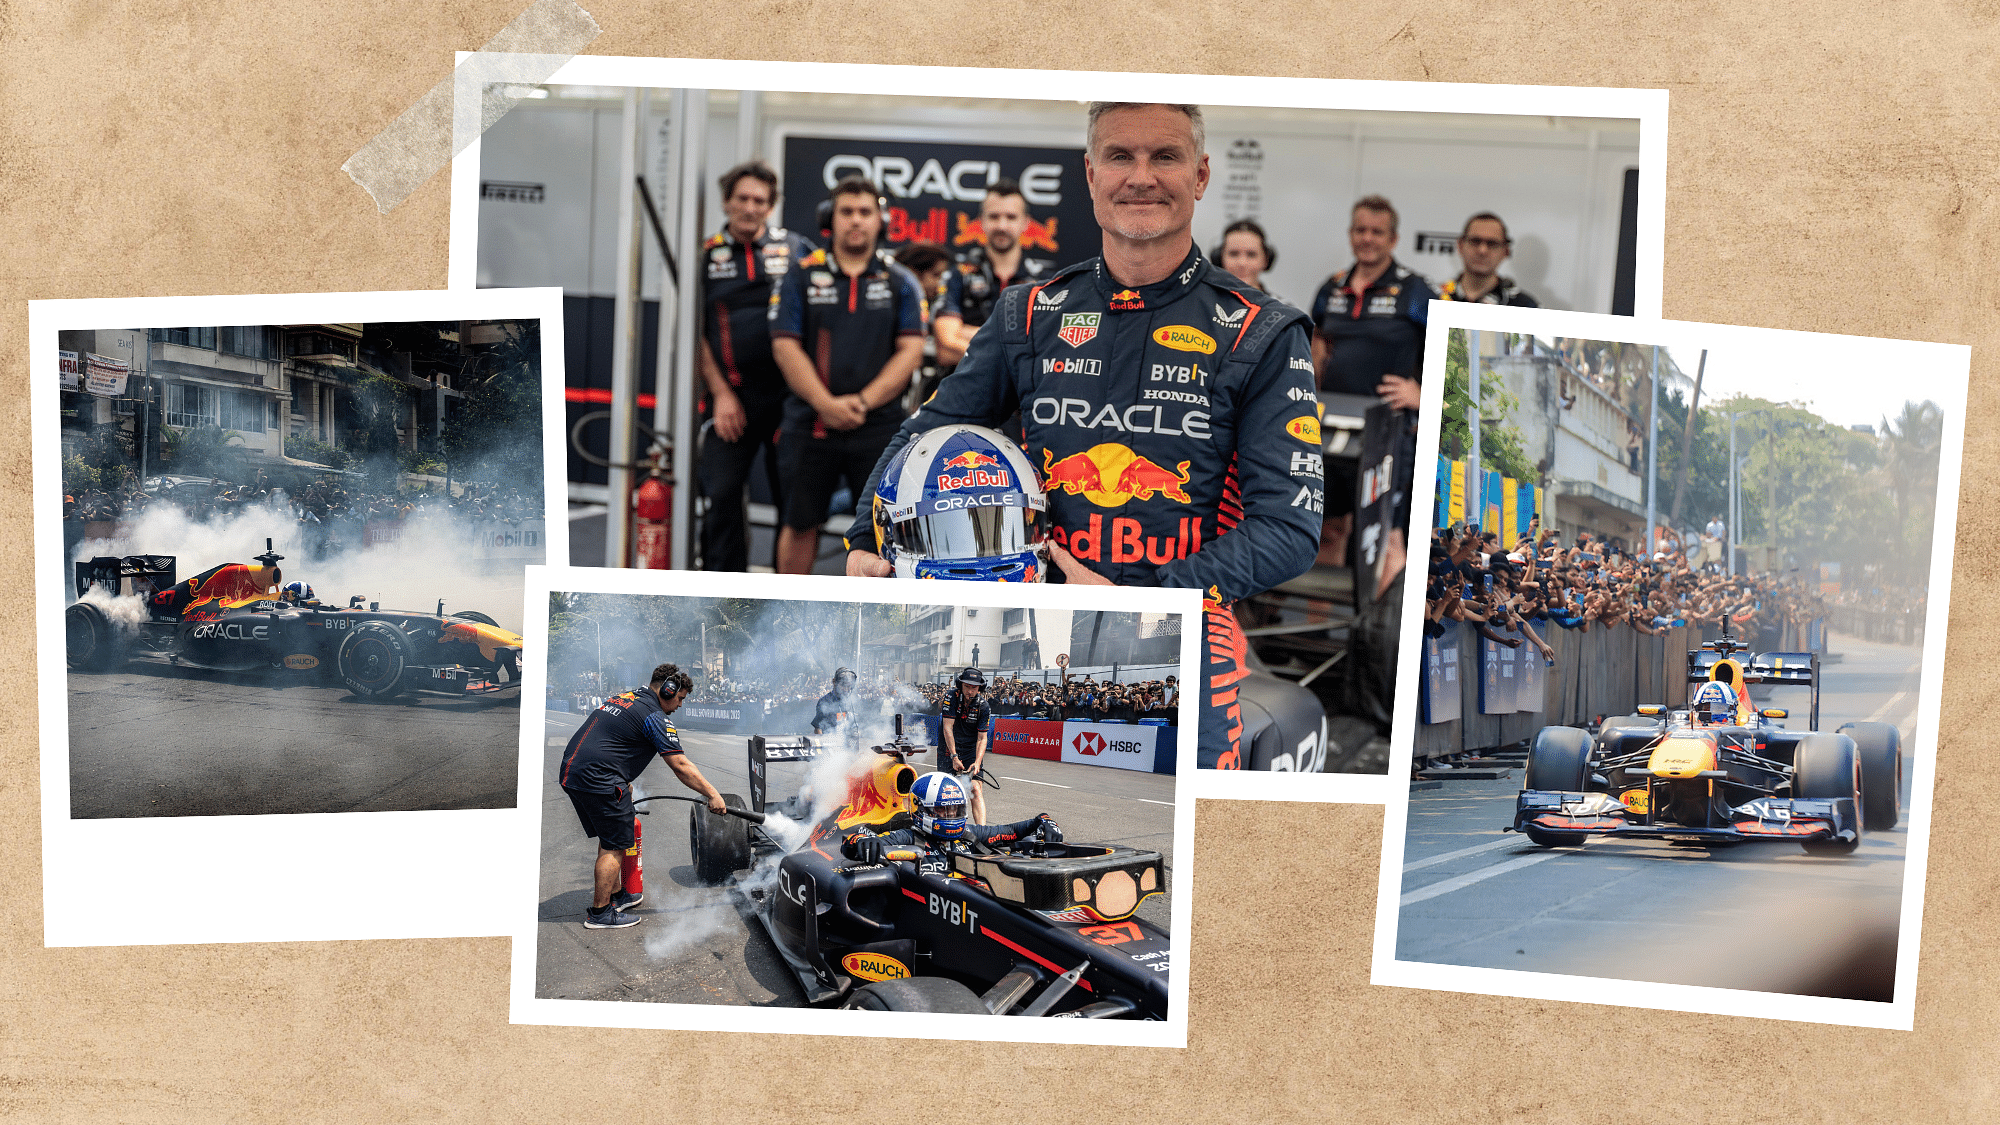 <div class="paragraphs"><p>David Coulthard drove through the Bandra Bandstand stretch in Mumbai in Red Bull's RB7 car.</p></div>